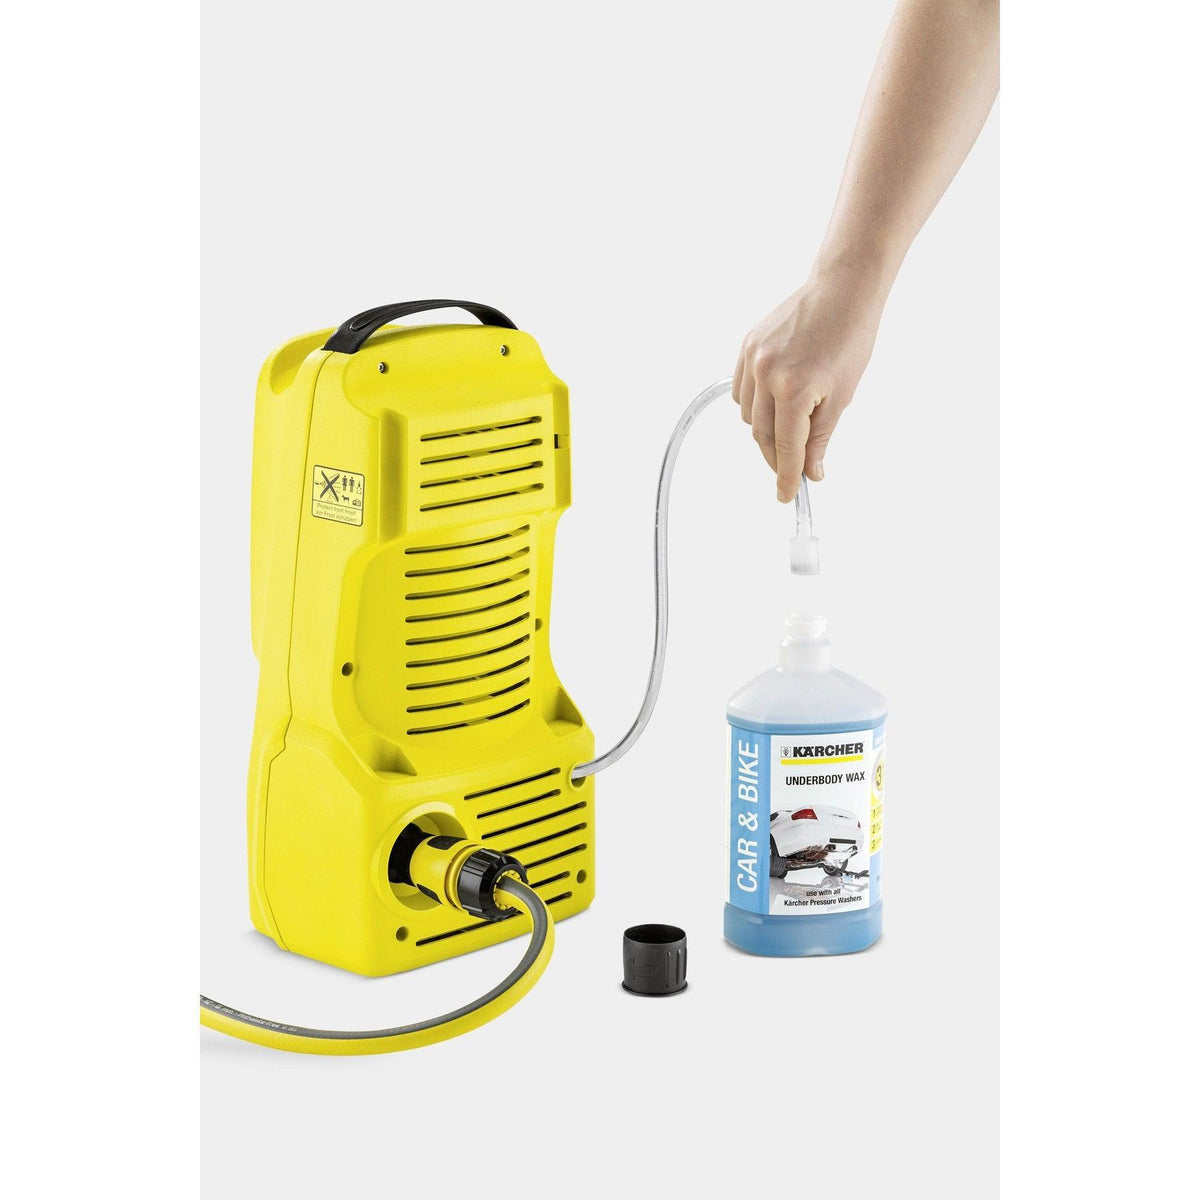 Karcher K 2 Compact Pressure Washer - Yellow | K2COMPACT from DID Electrical - guaranteed Irish, guaranteed quality service. (6977623294140)